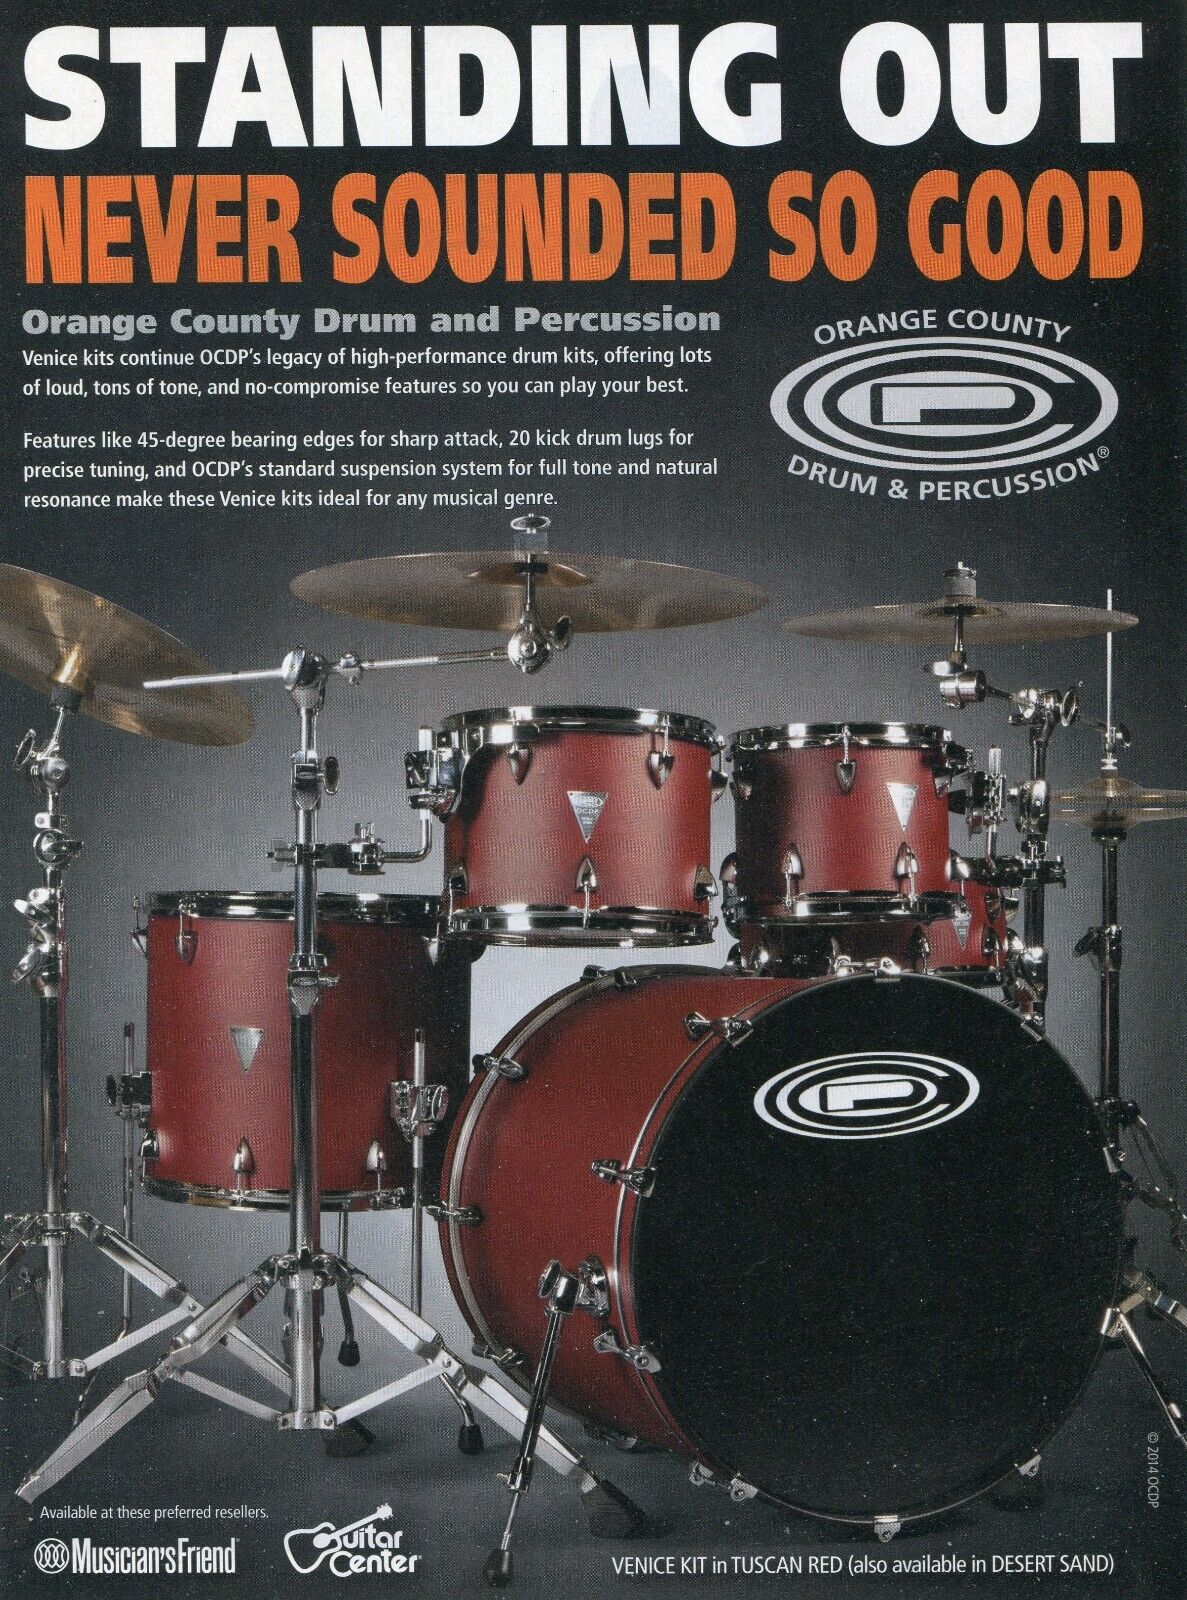 2014 Print Ad of OCDP Orange County Drum & Percussion Venice Tuscan Red Kit